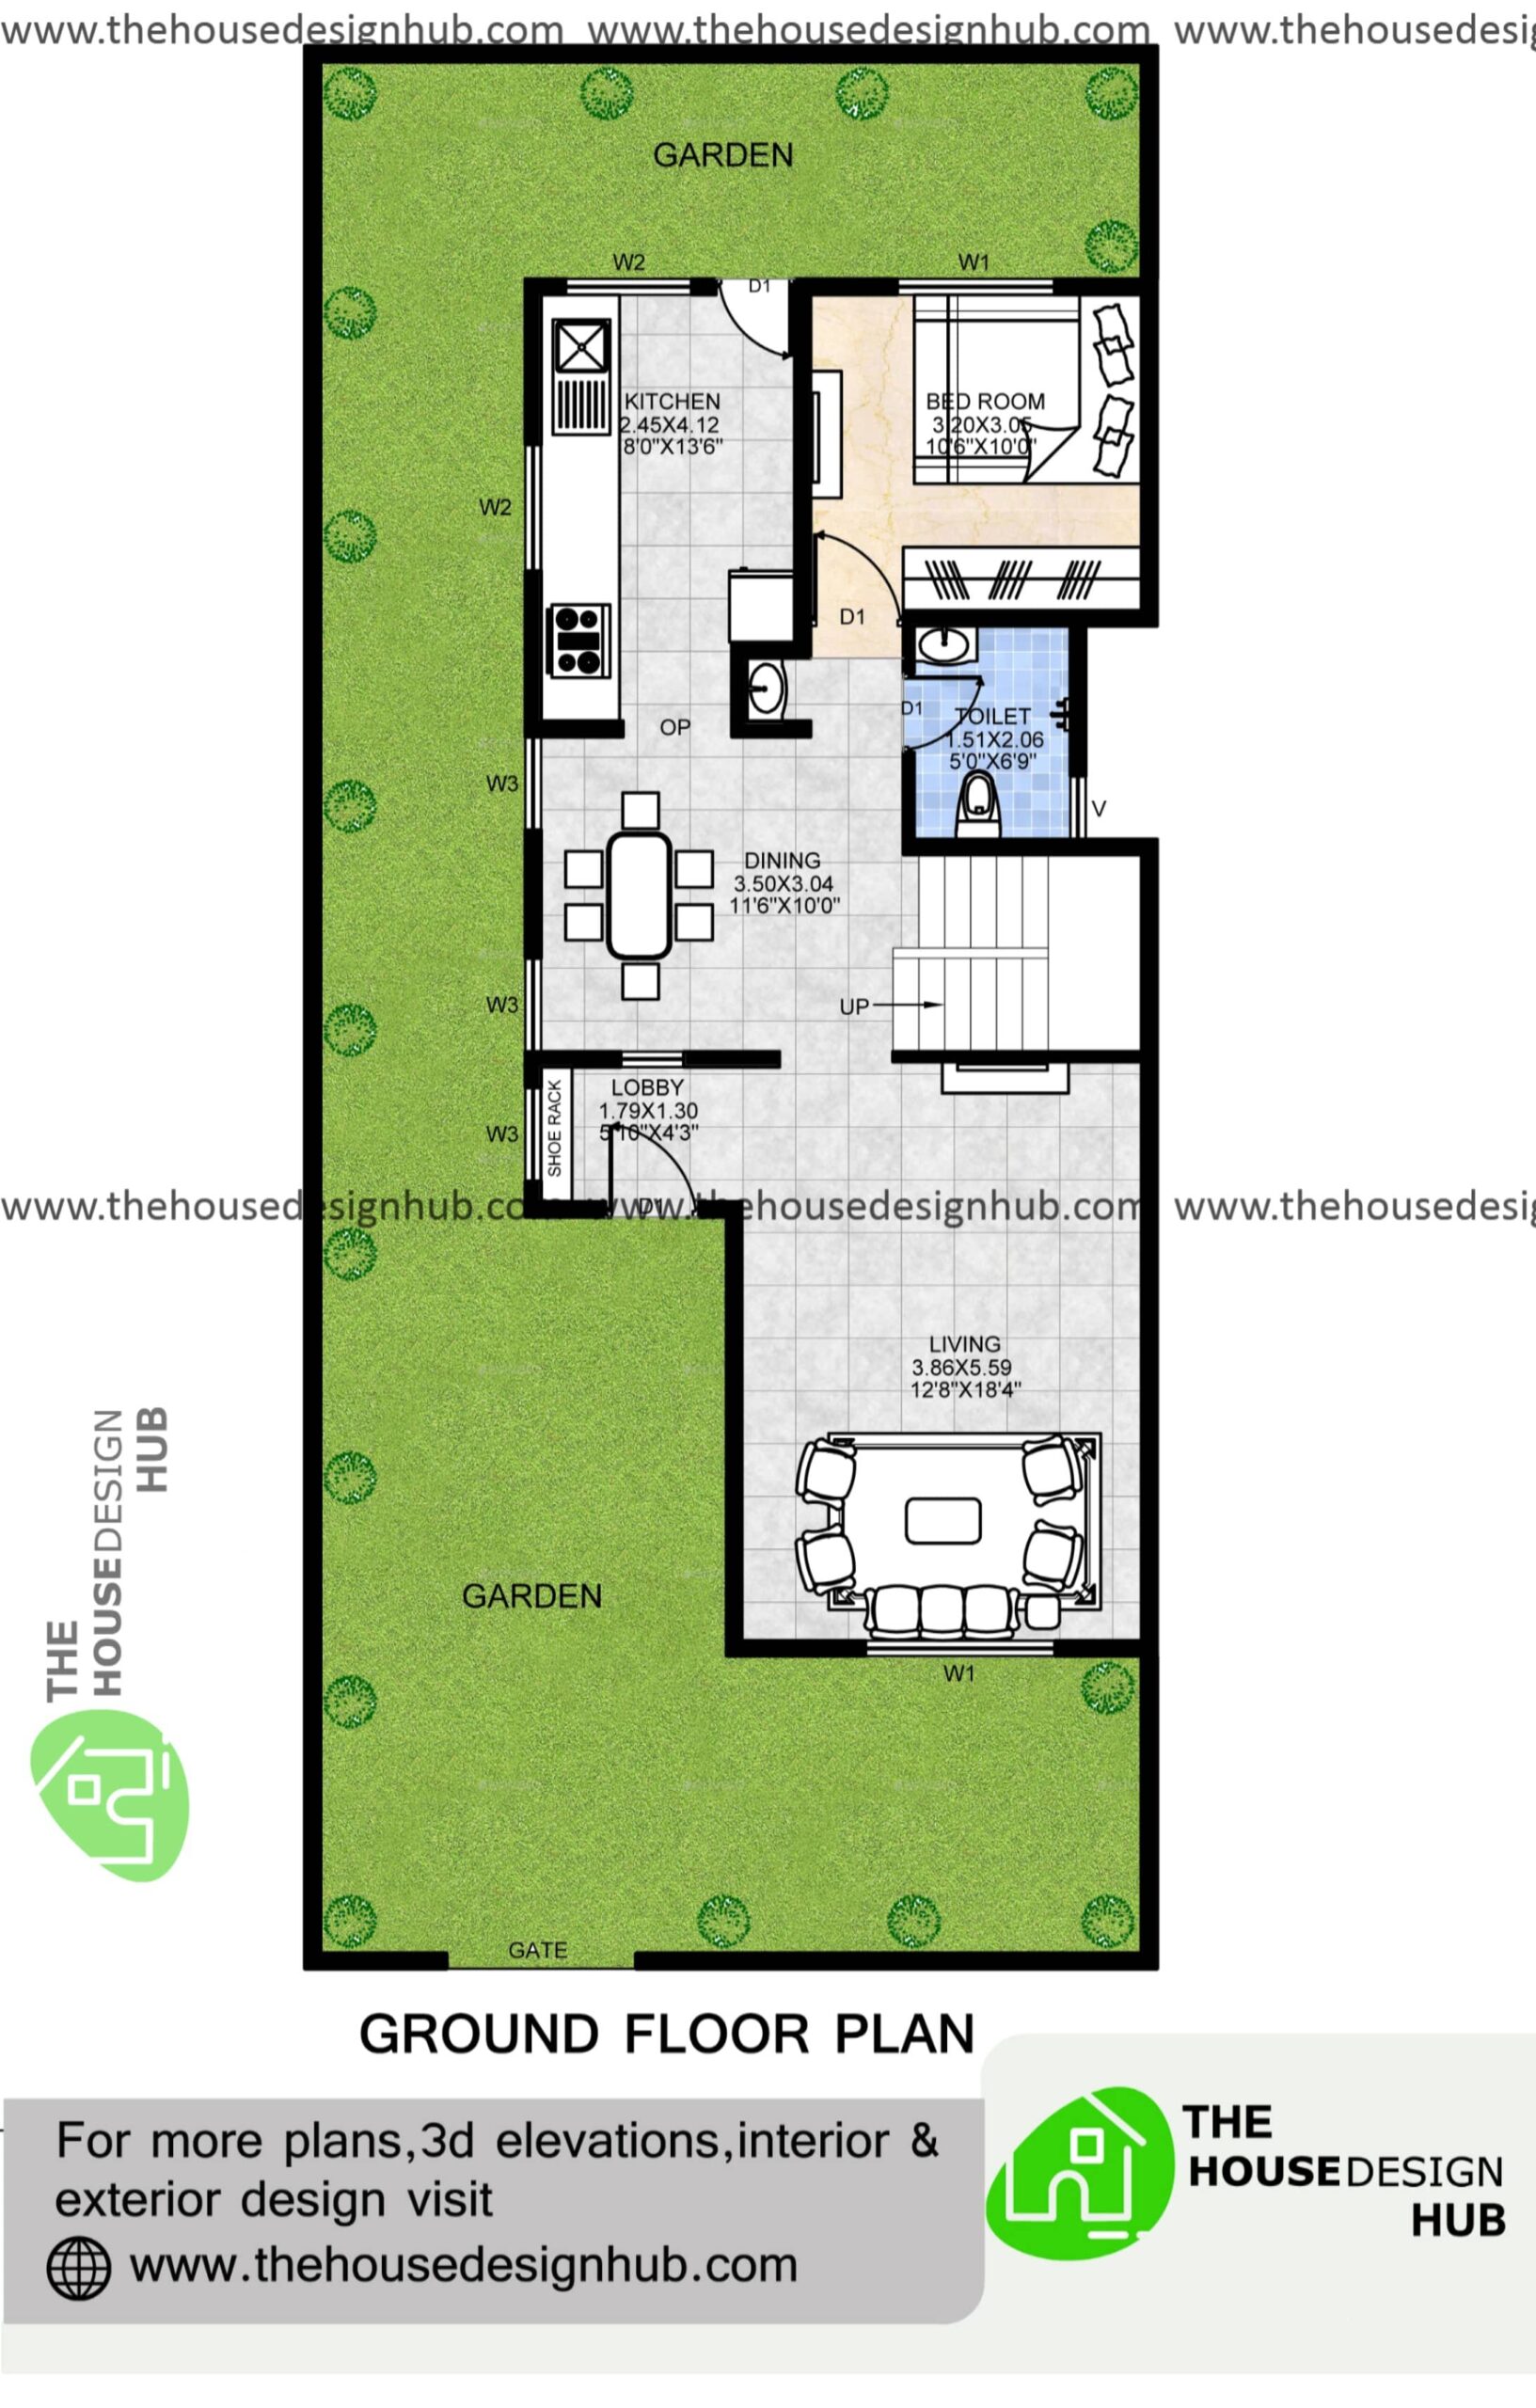 18 X 43 Ft 1 Bhk House Plan Drawing In 750 Sq Ft | The House Design Hub